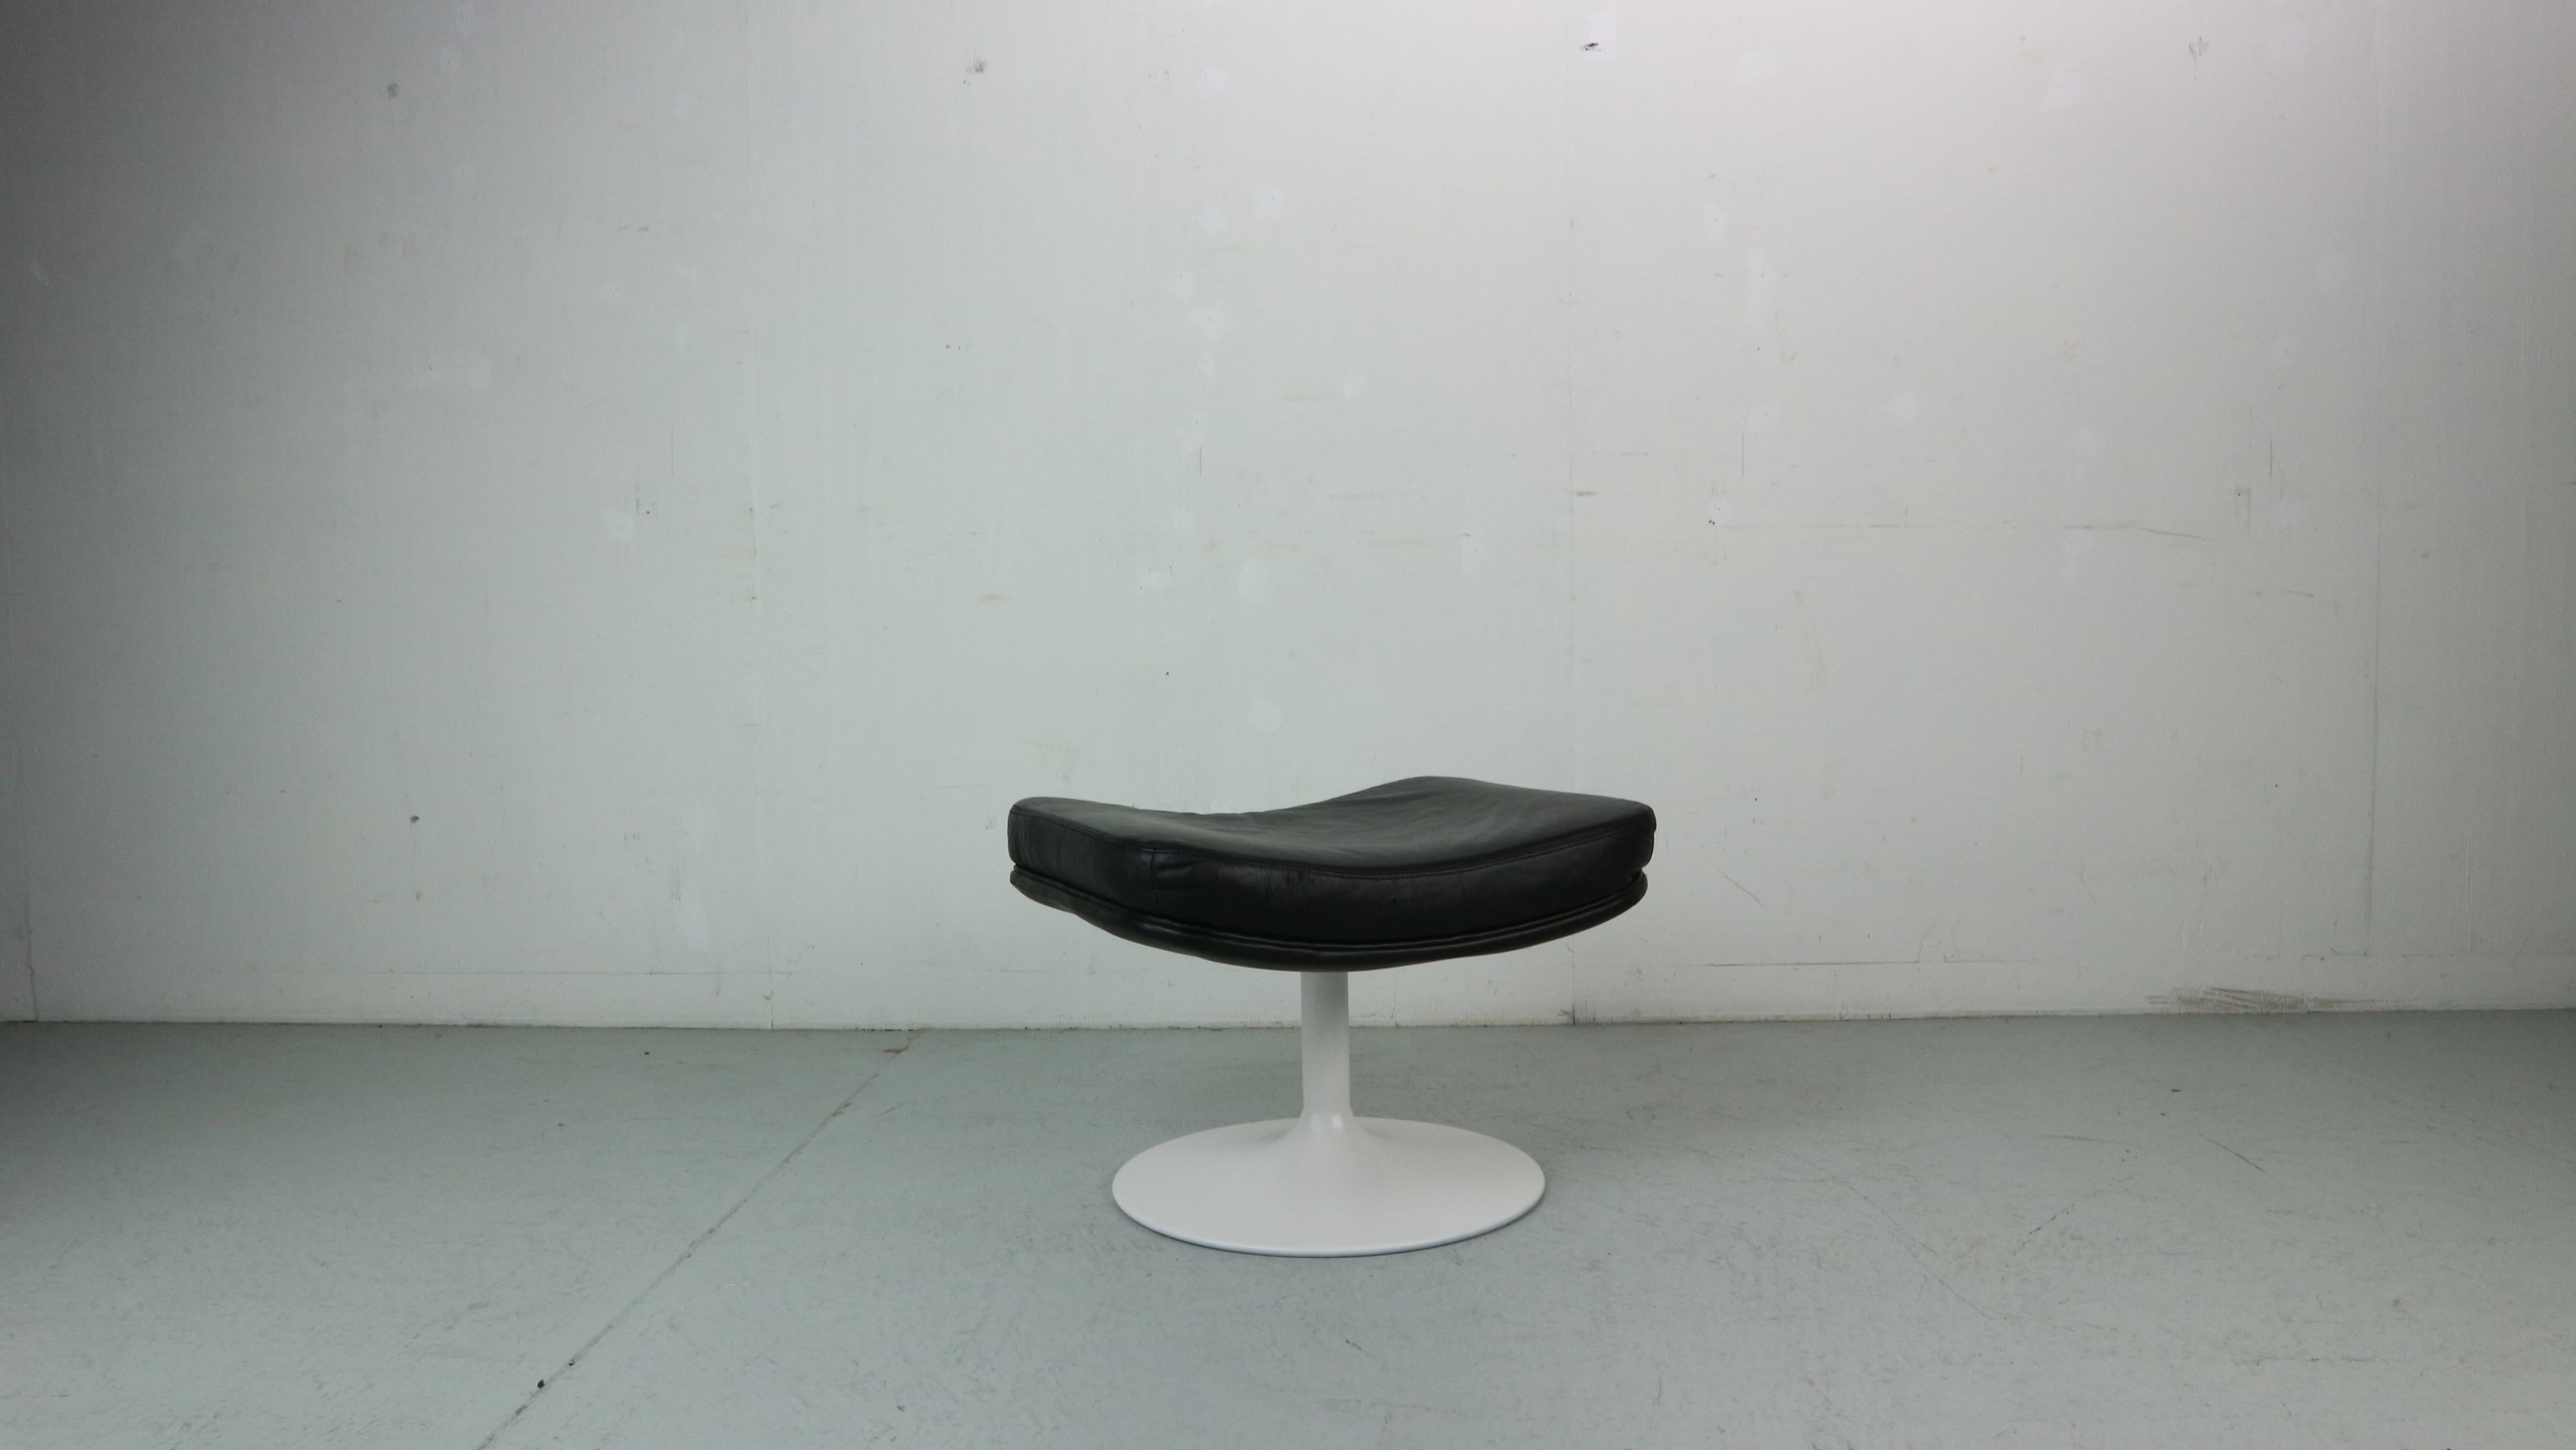 P588 Fotstool or ottoman that will fir all the 500 serie geoffrey Harcourt chairs. 
The leather is in overal good condition and the foot has been re-painted in a off white matt.
